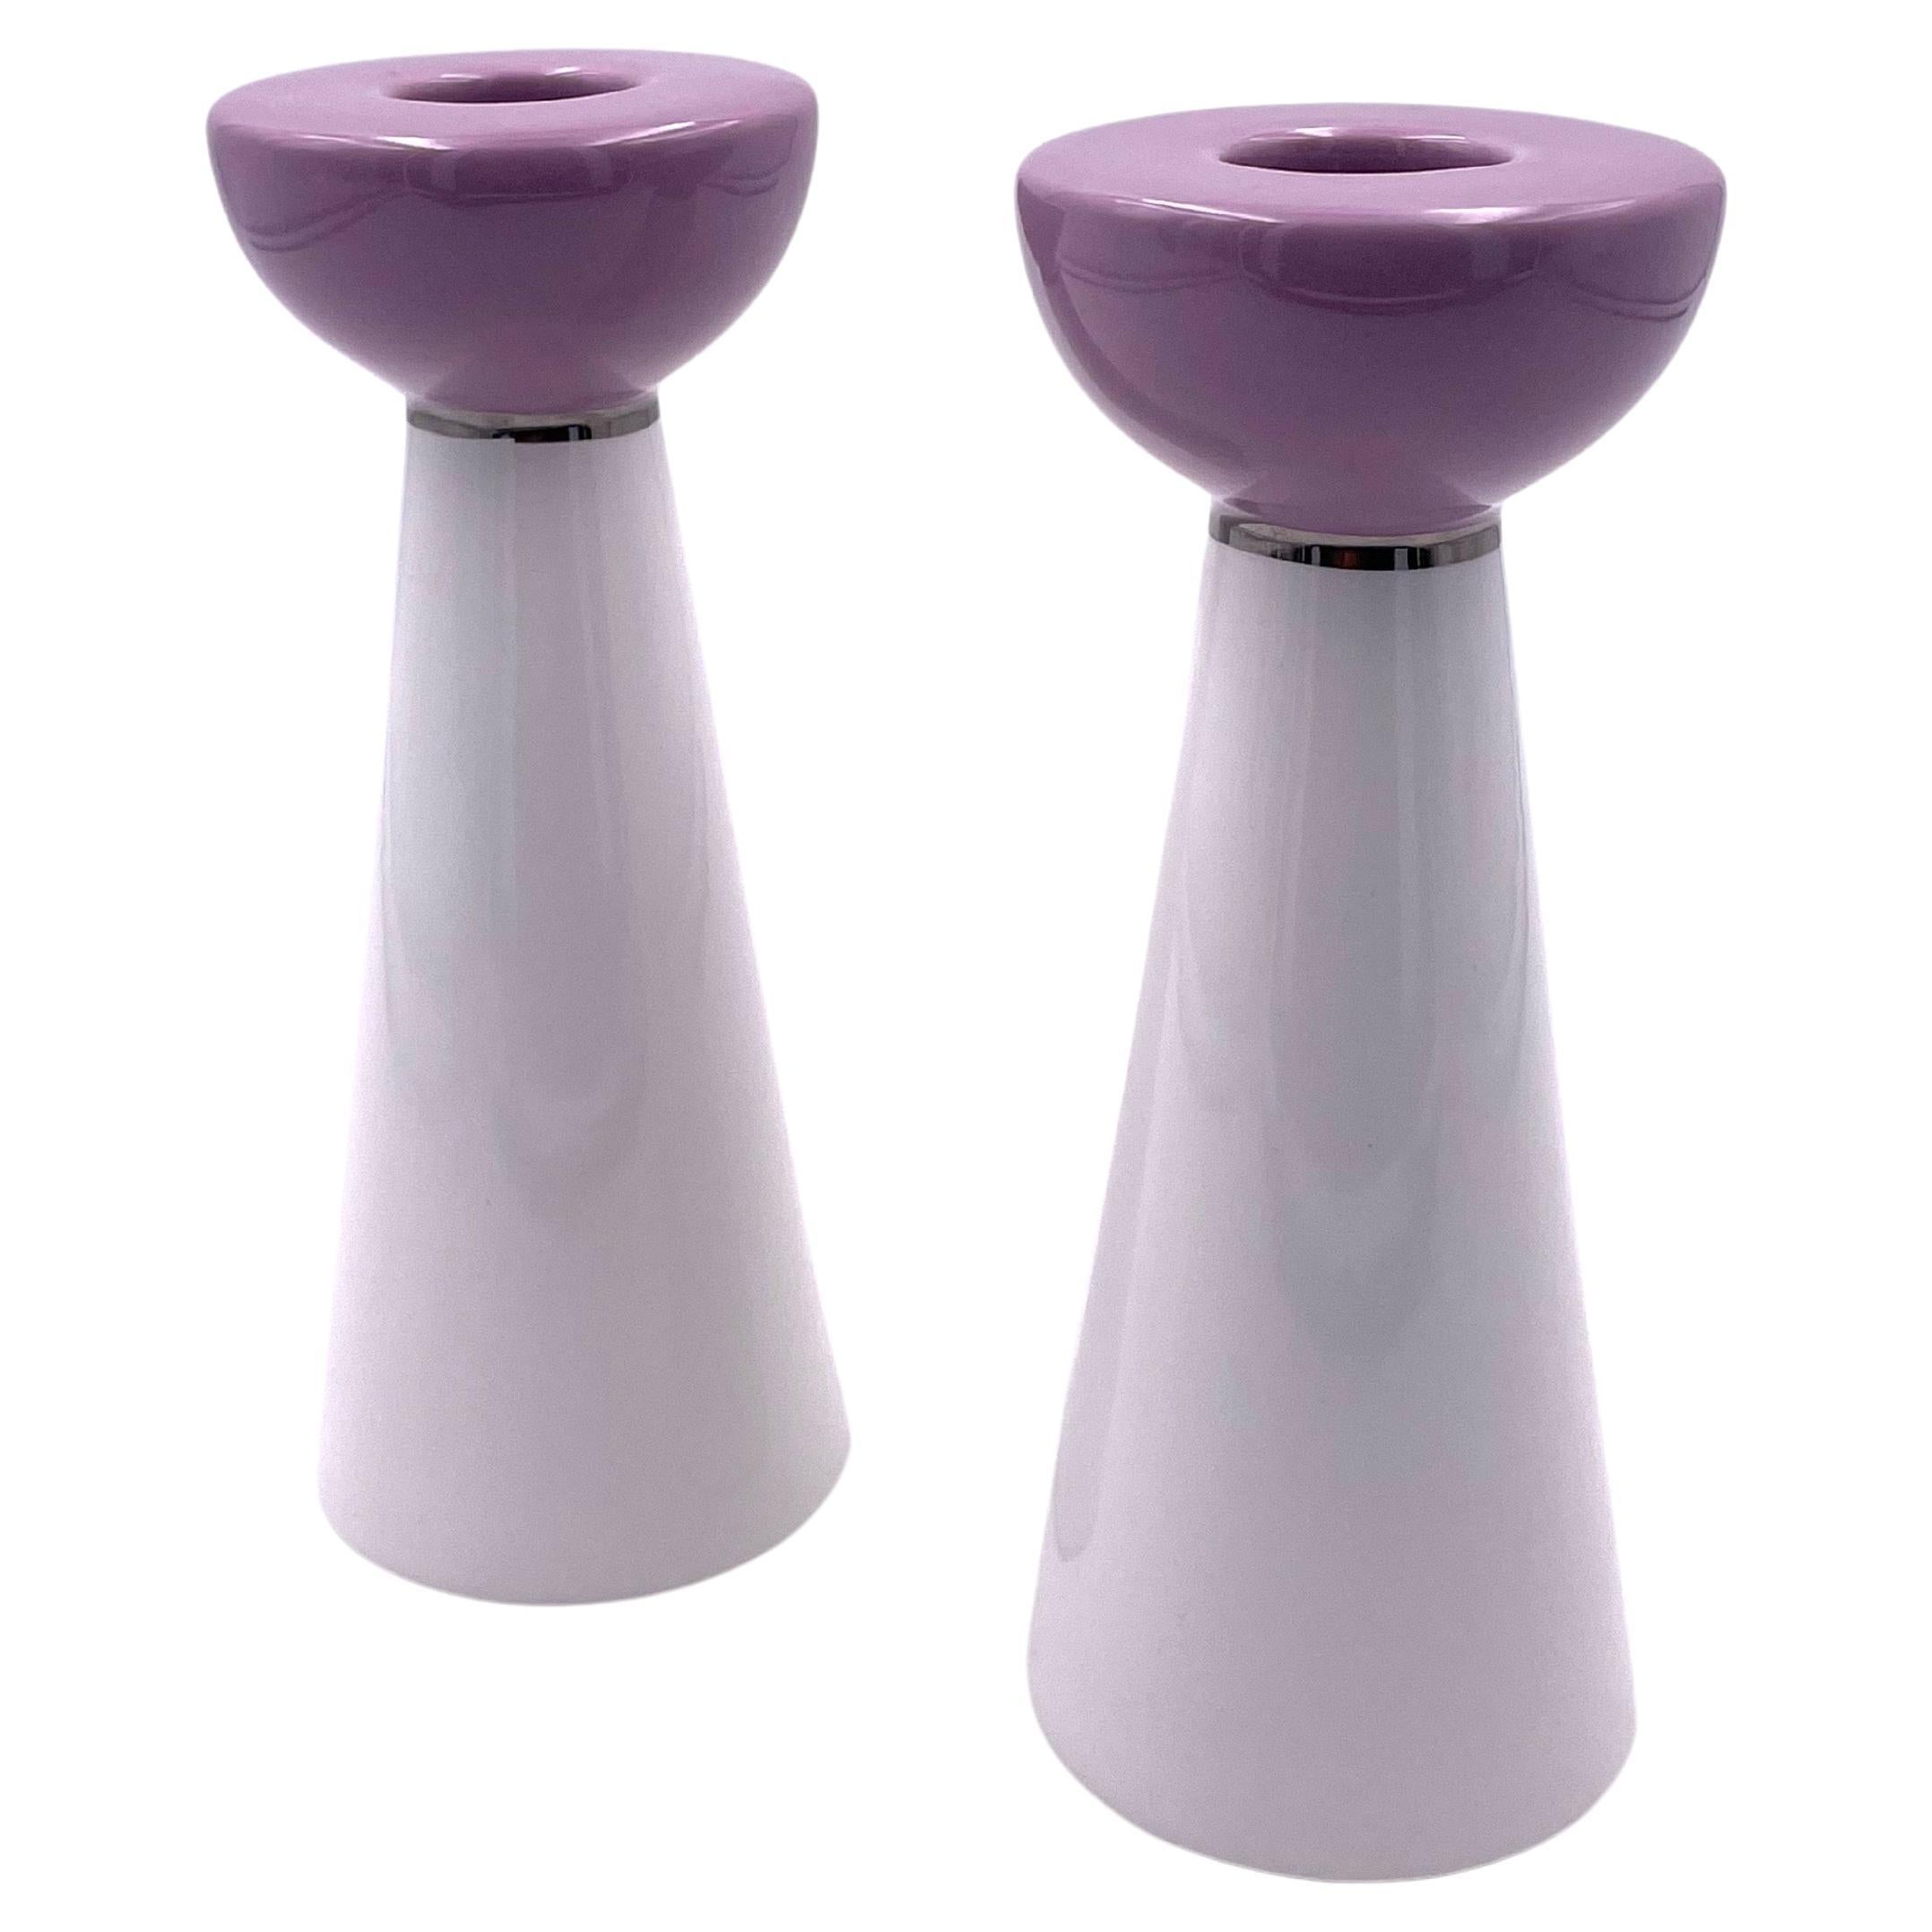 Pair of Postmodern Style Candleholders Designed by Kate Spade for Lenox